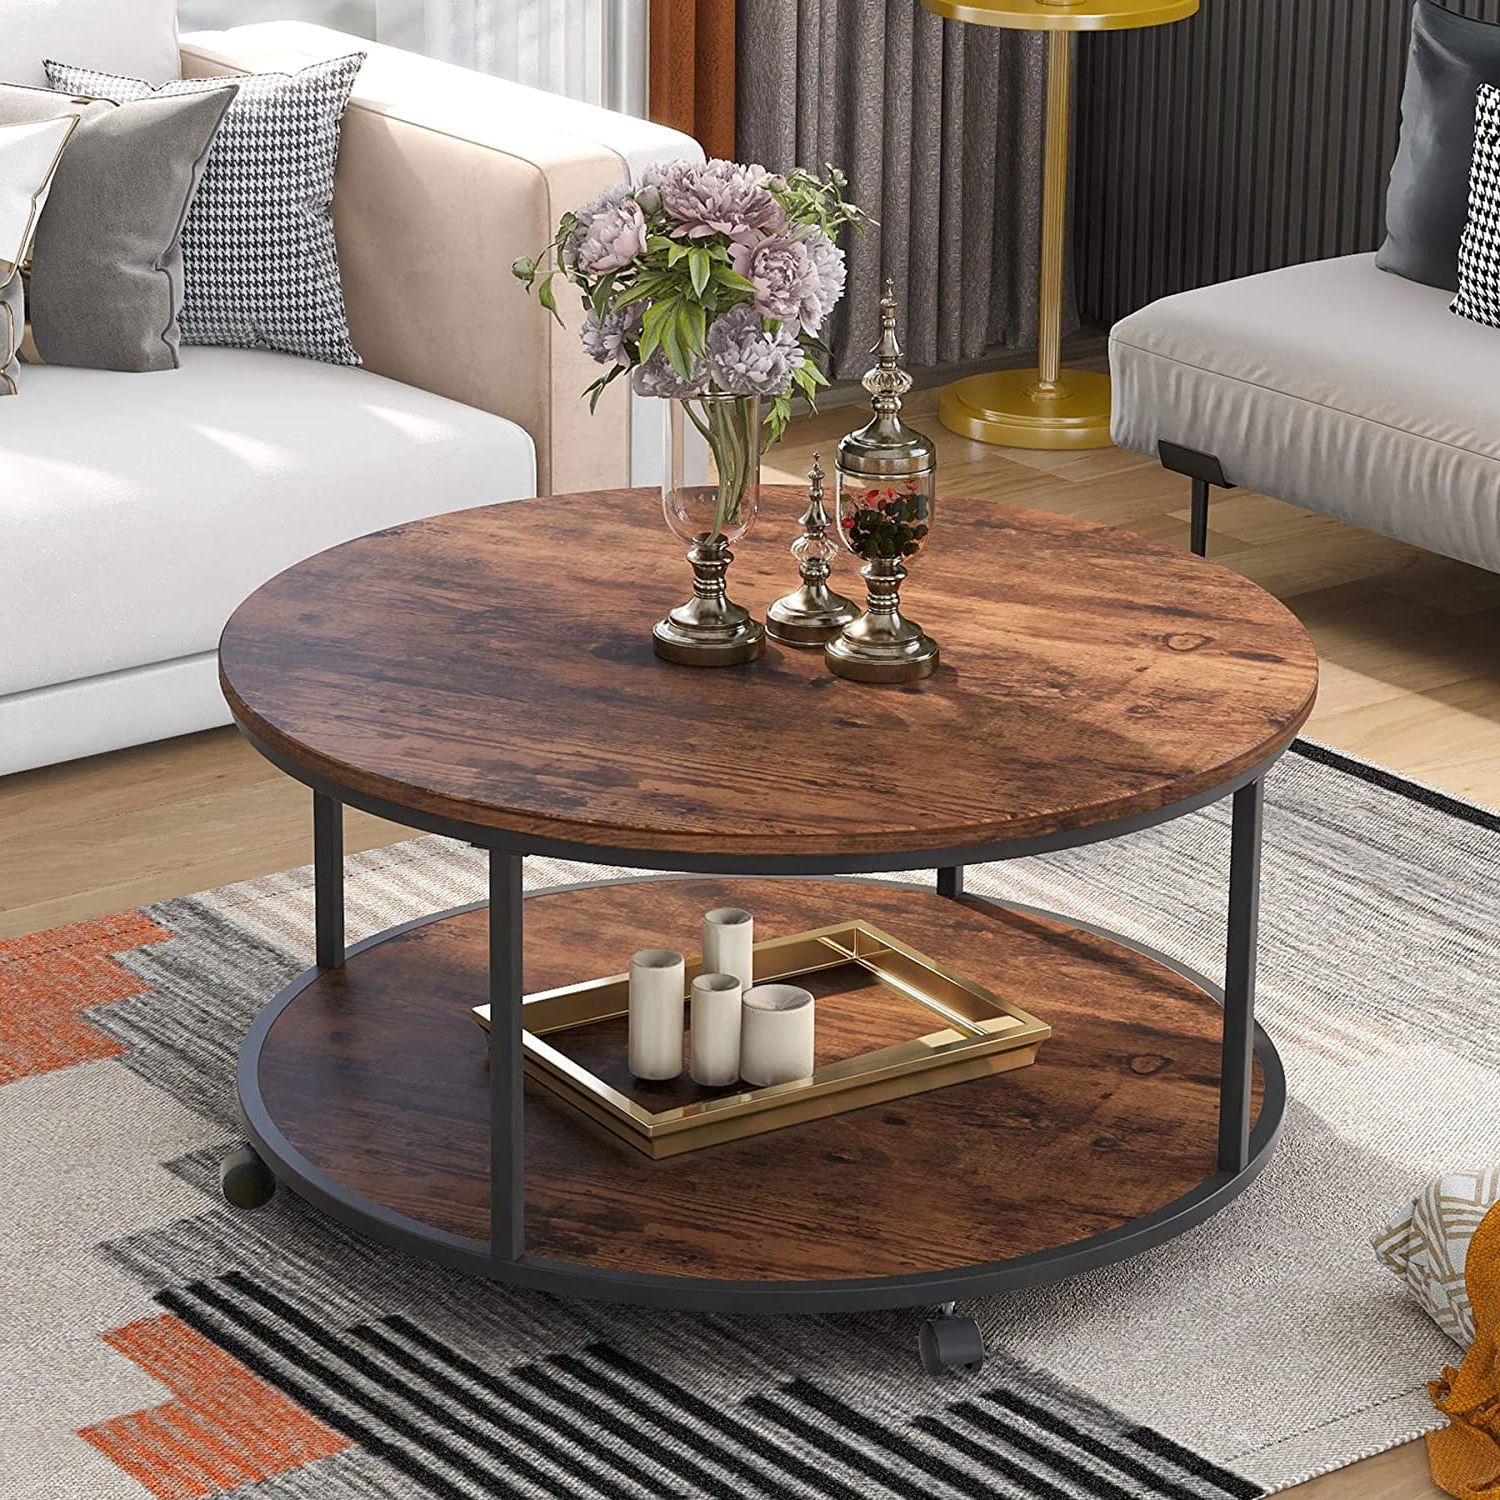 Rustic Round Coffee Table – Photos Regarding Newest Coffee Tables With Round Wooden Tops (View 8 of 15)